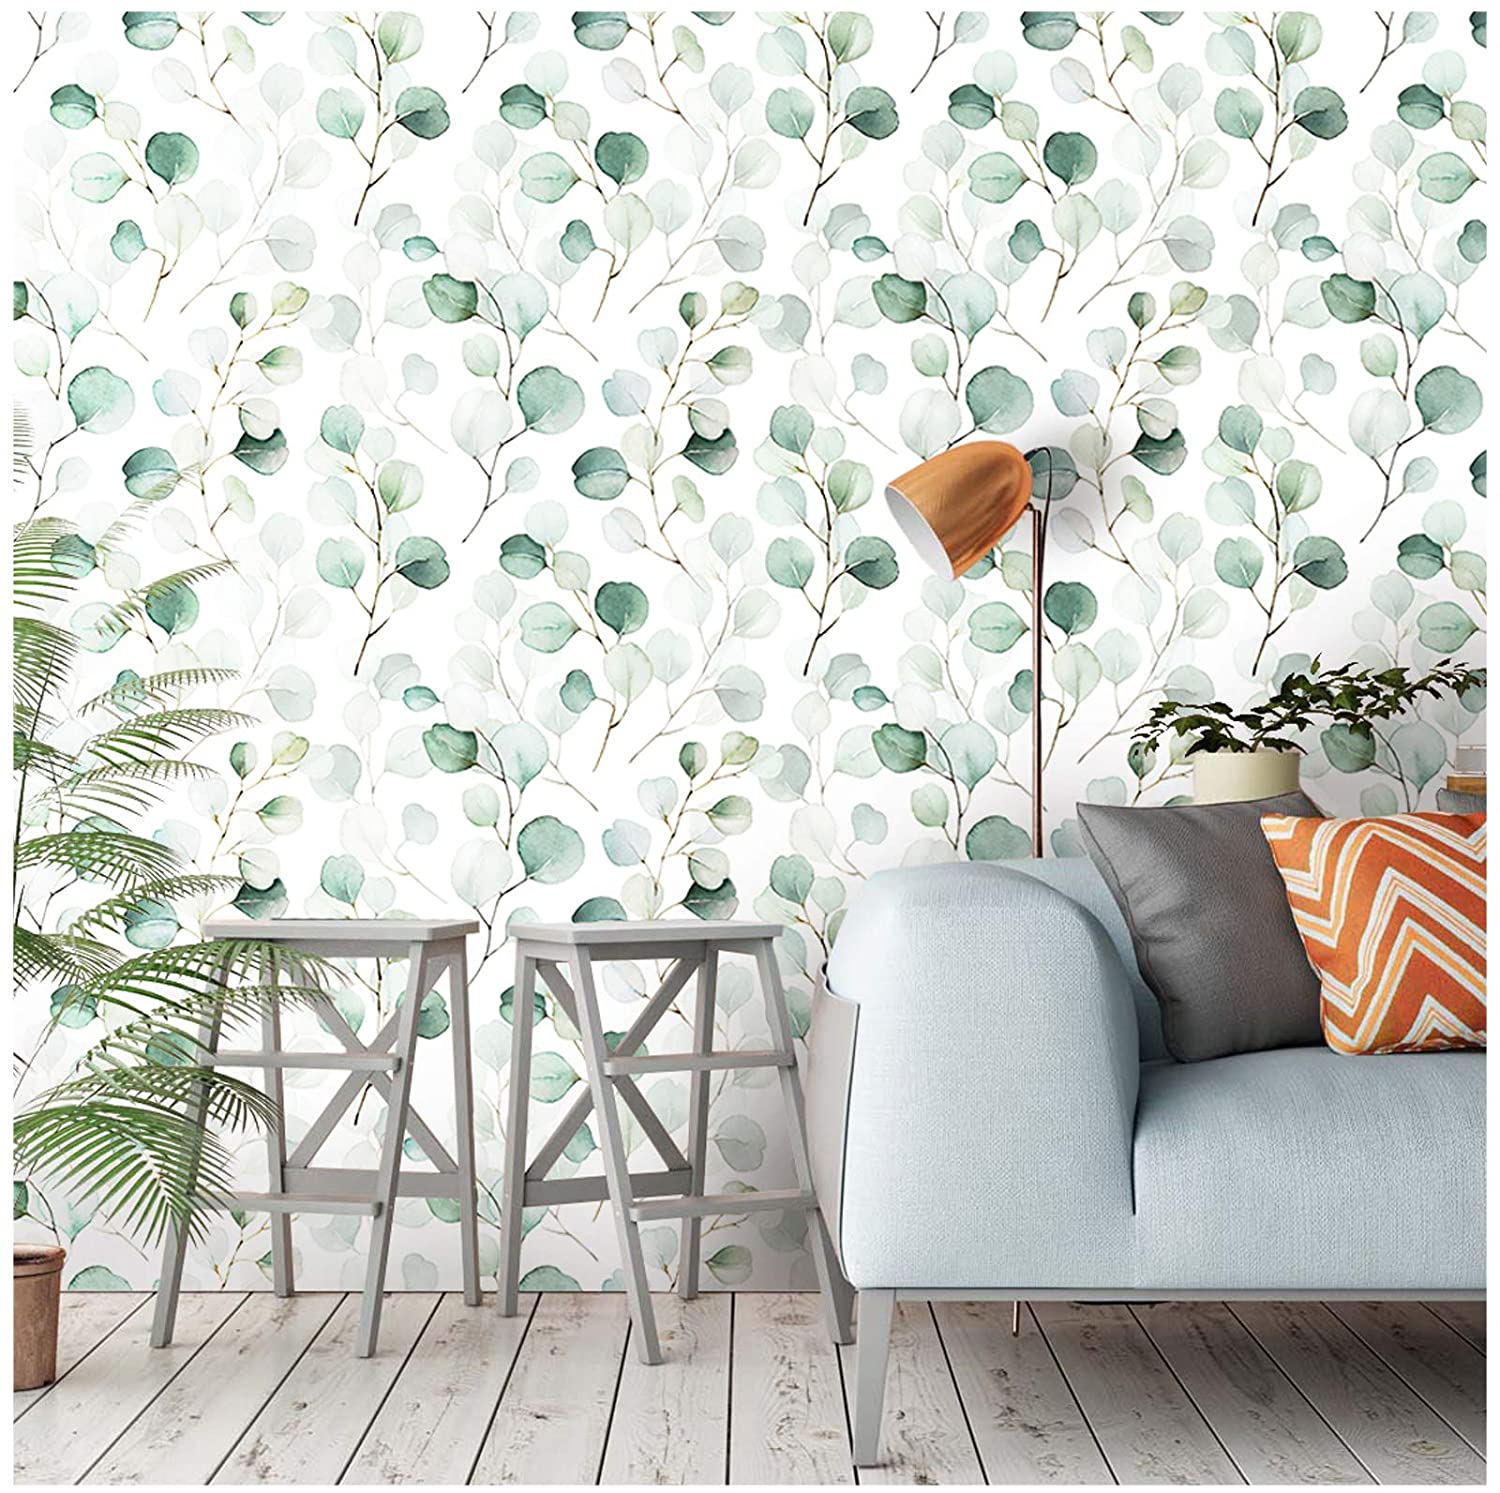 
HaokHome 93044 Peel and Stick Wallpaper Green/White Eucalyptus Leaf Wall Mural Home Nursery Decor 17.7in x 9.8ft